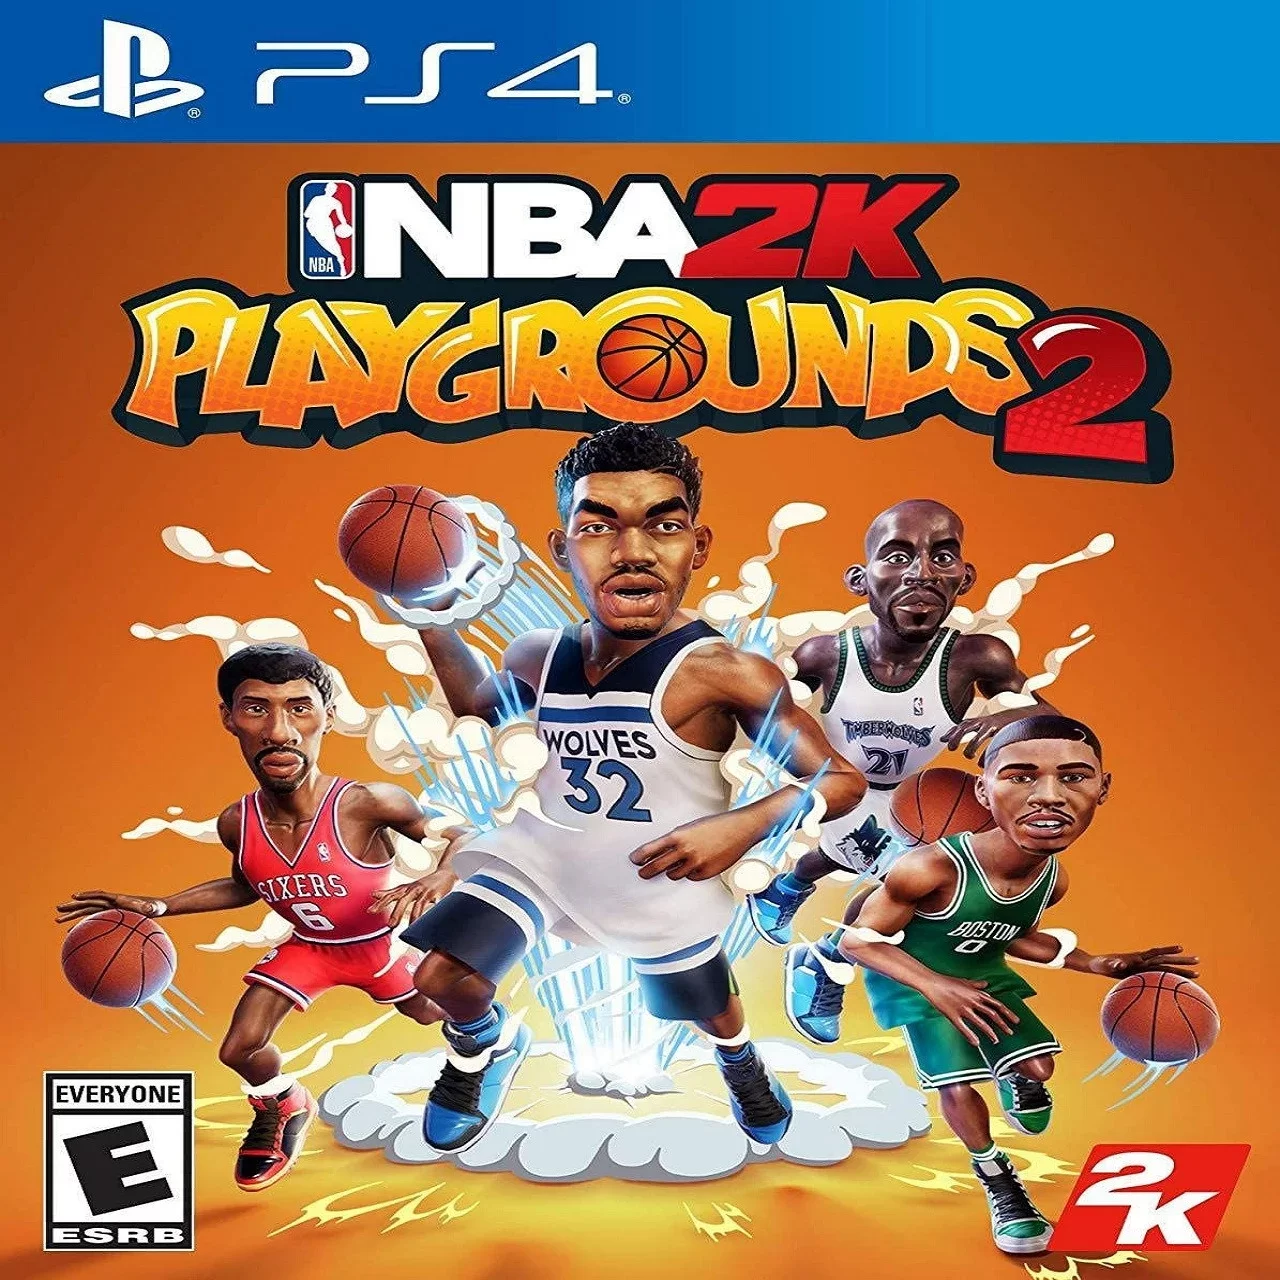 Nba playgrounds steam фото 60